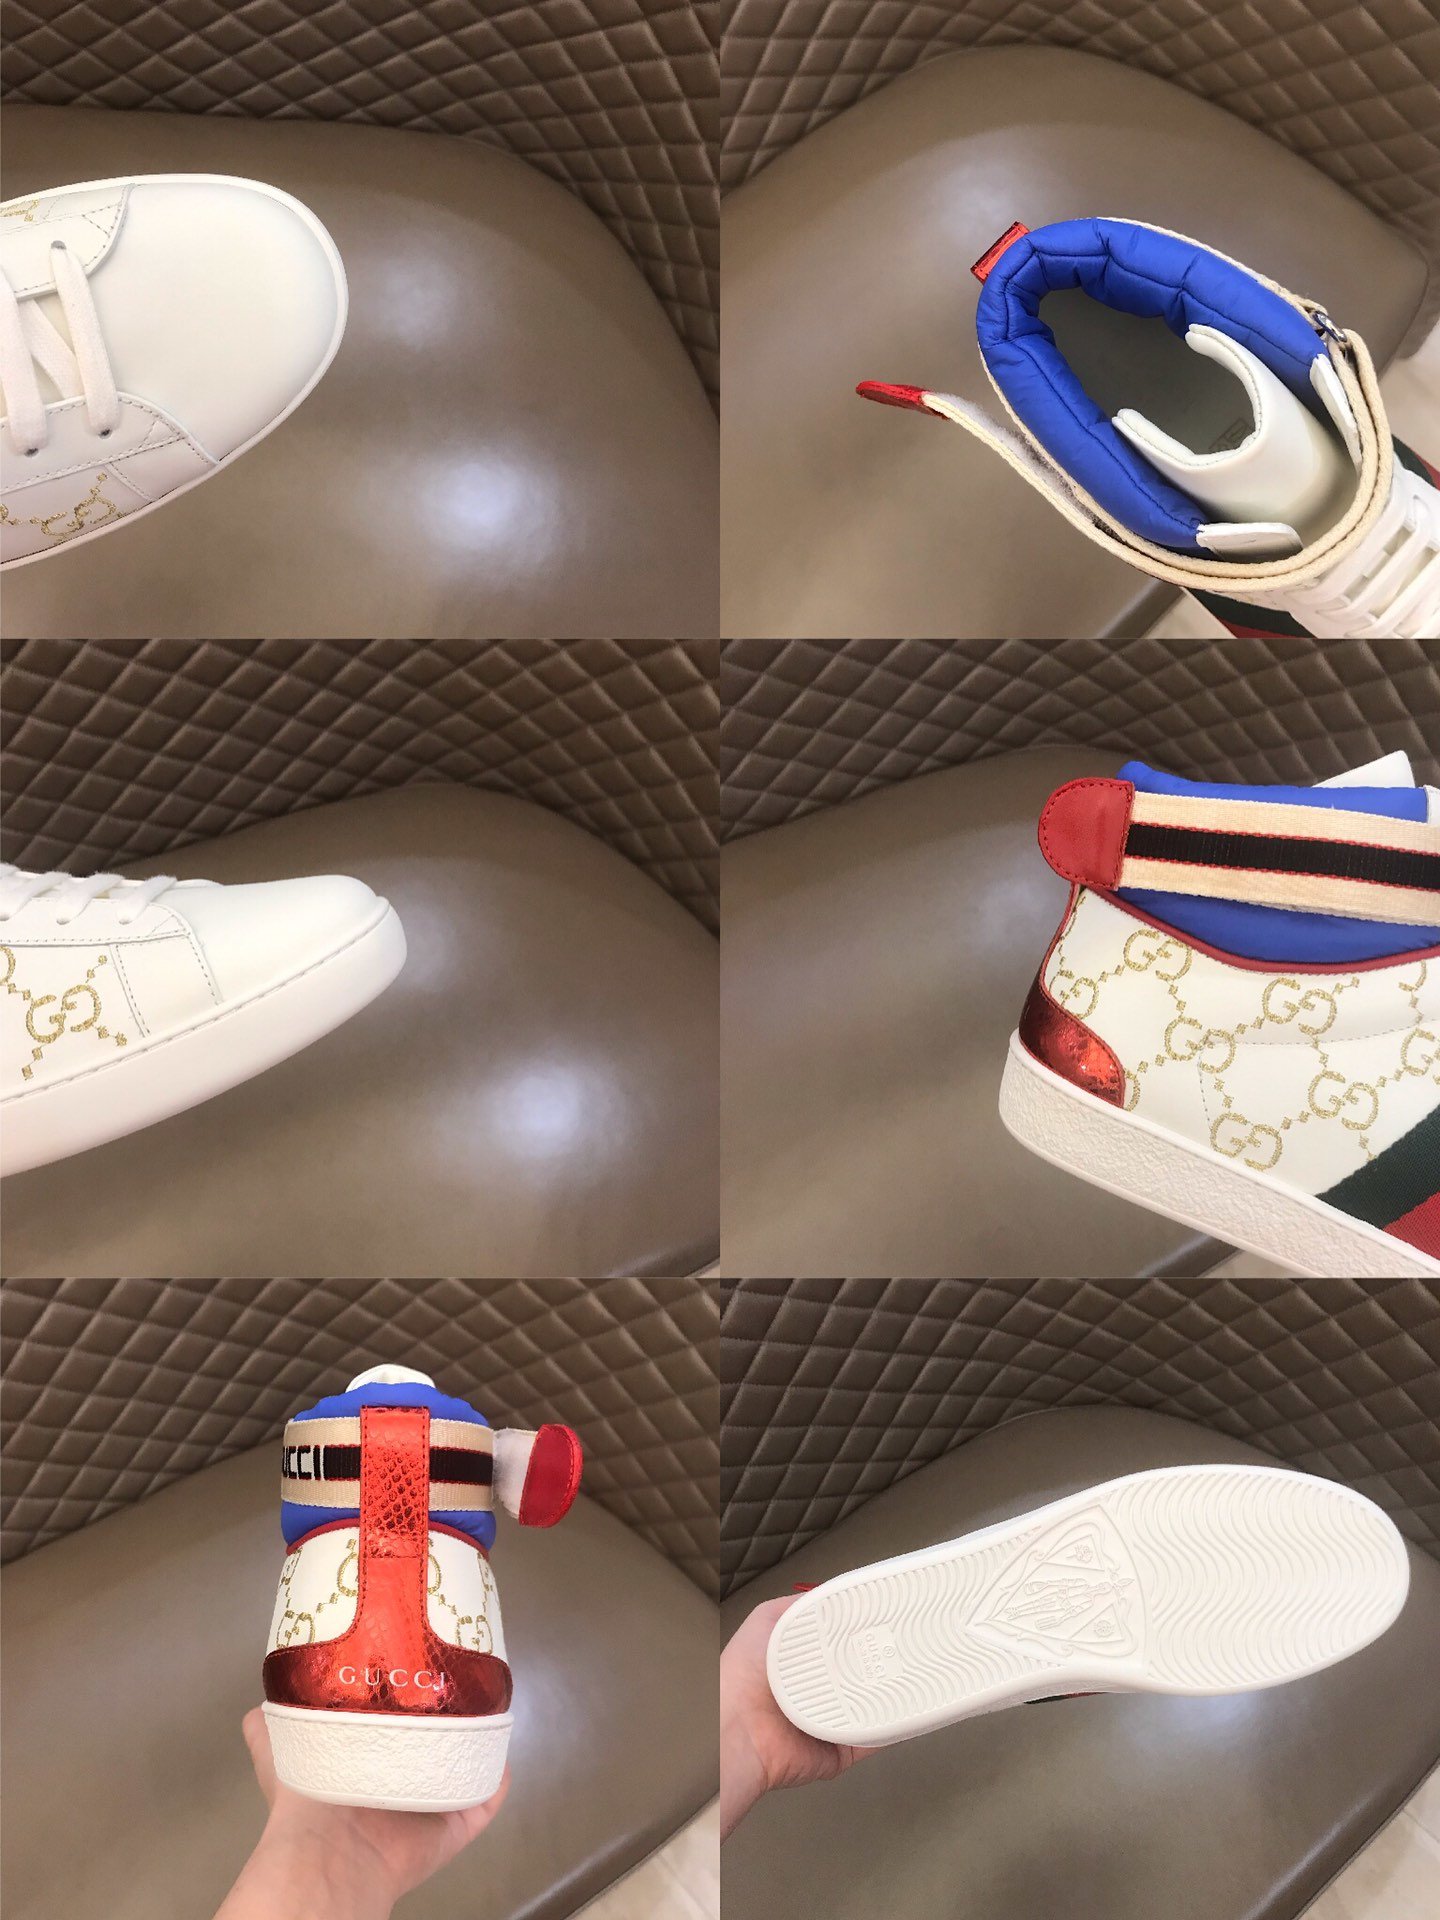 Gucci High-top High Quality Sneakers White GG print and blue details with white sole MS021157